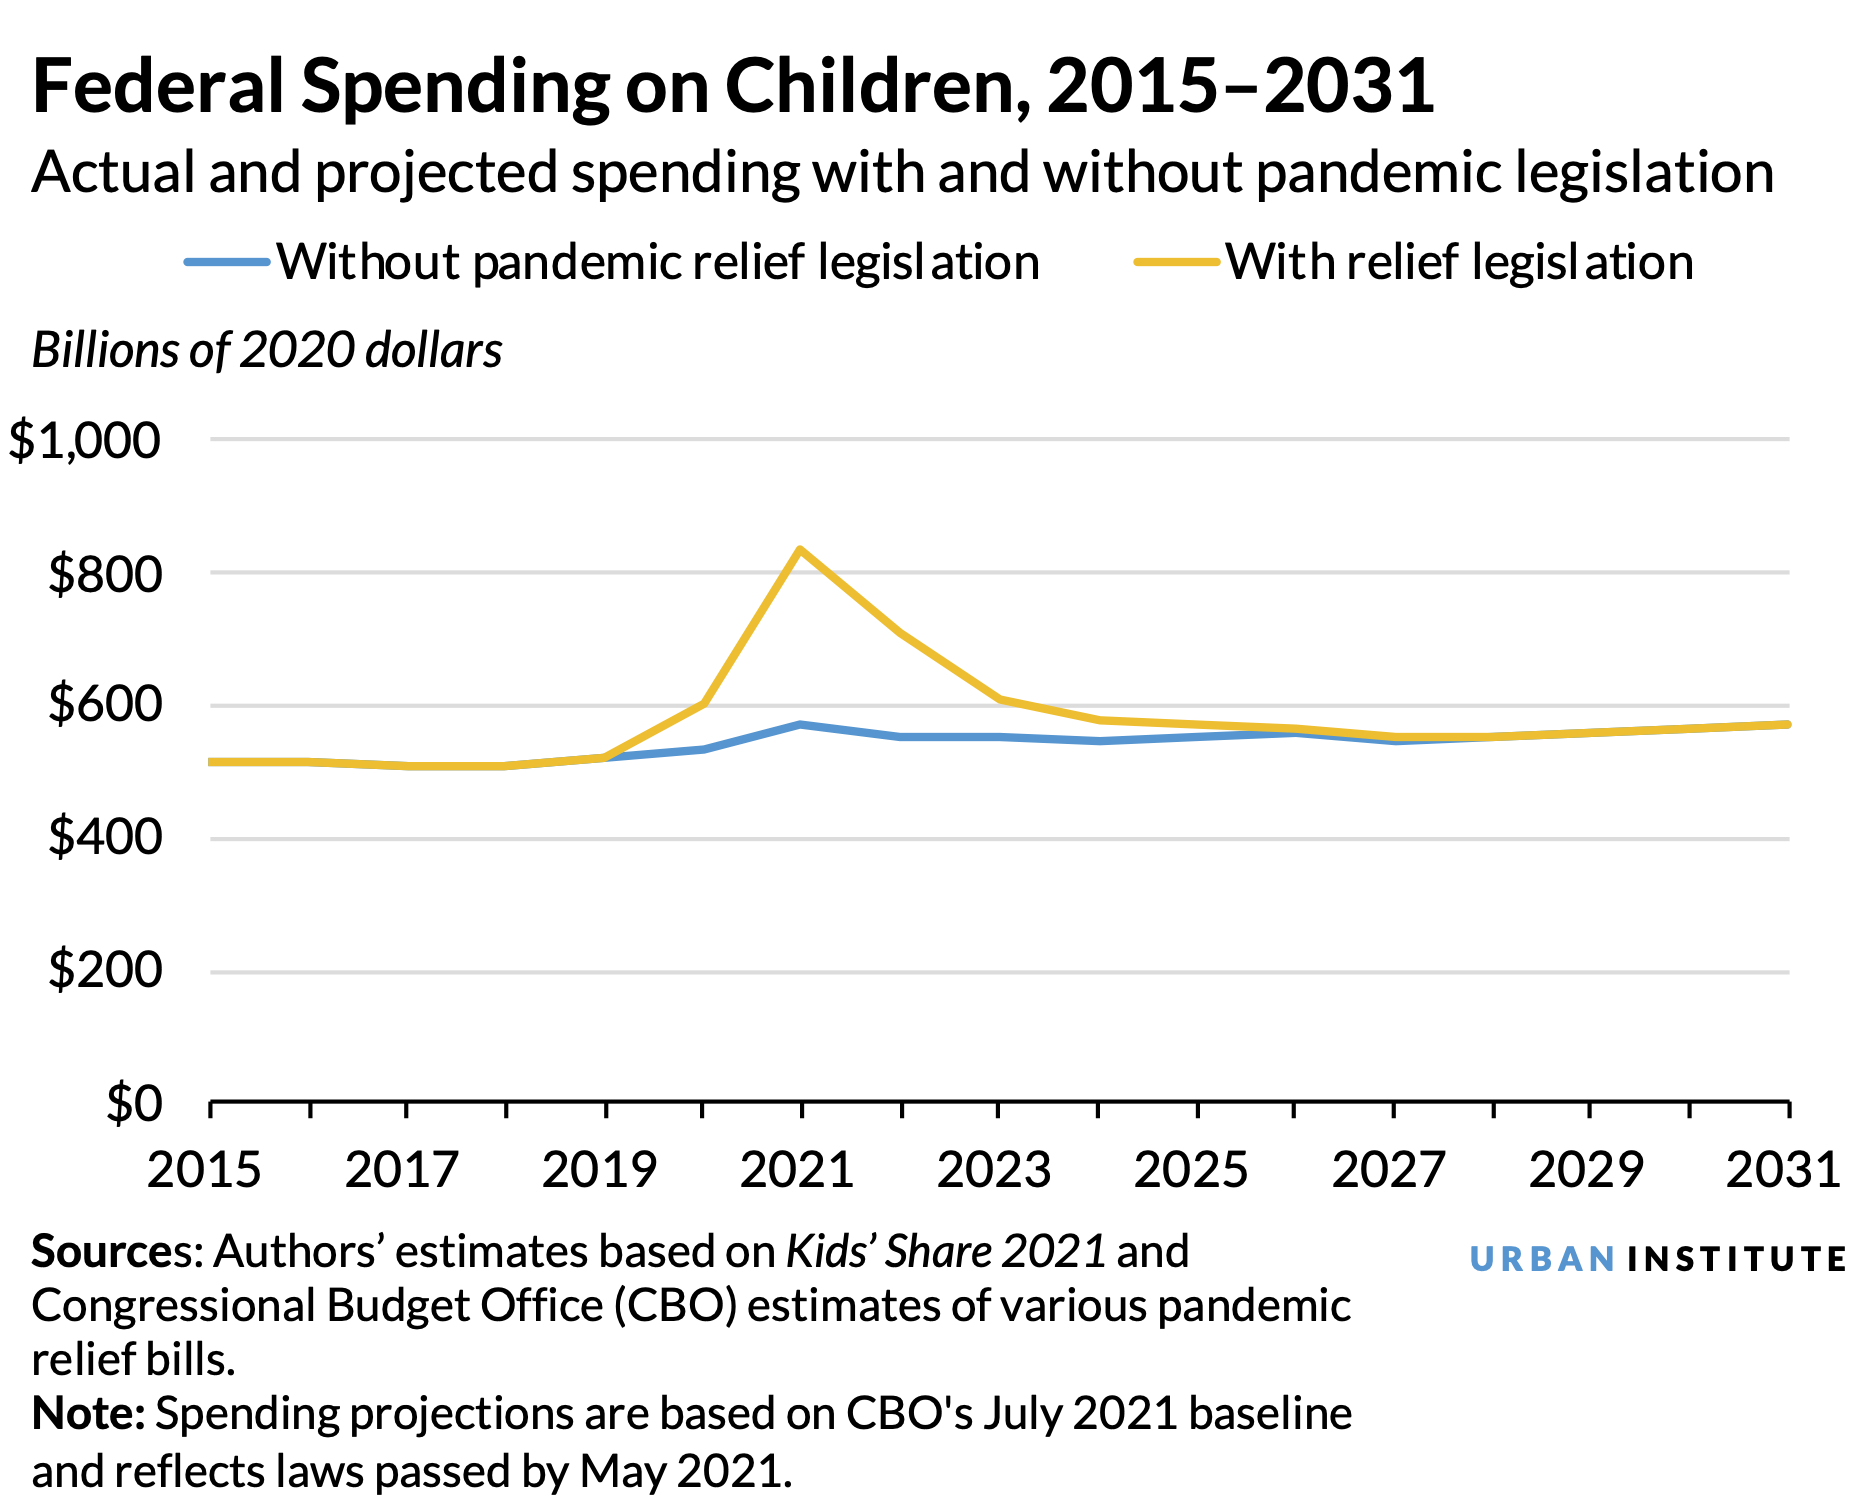 Line chart showing federal spending on children from 2015 to 2031, with and without pandemic legislation.